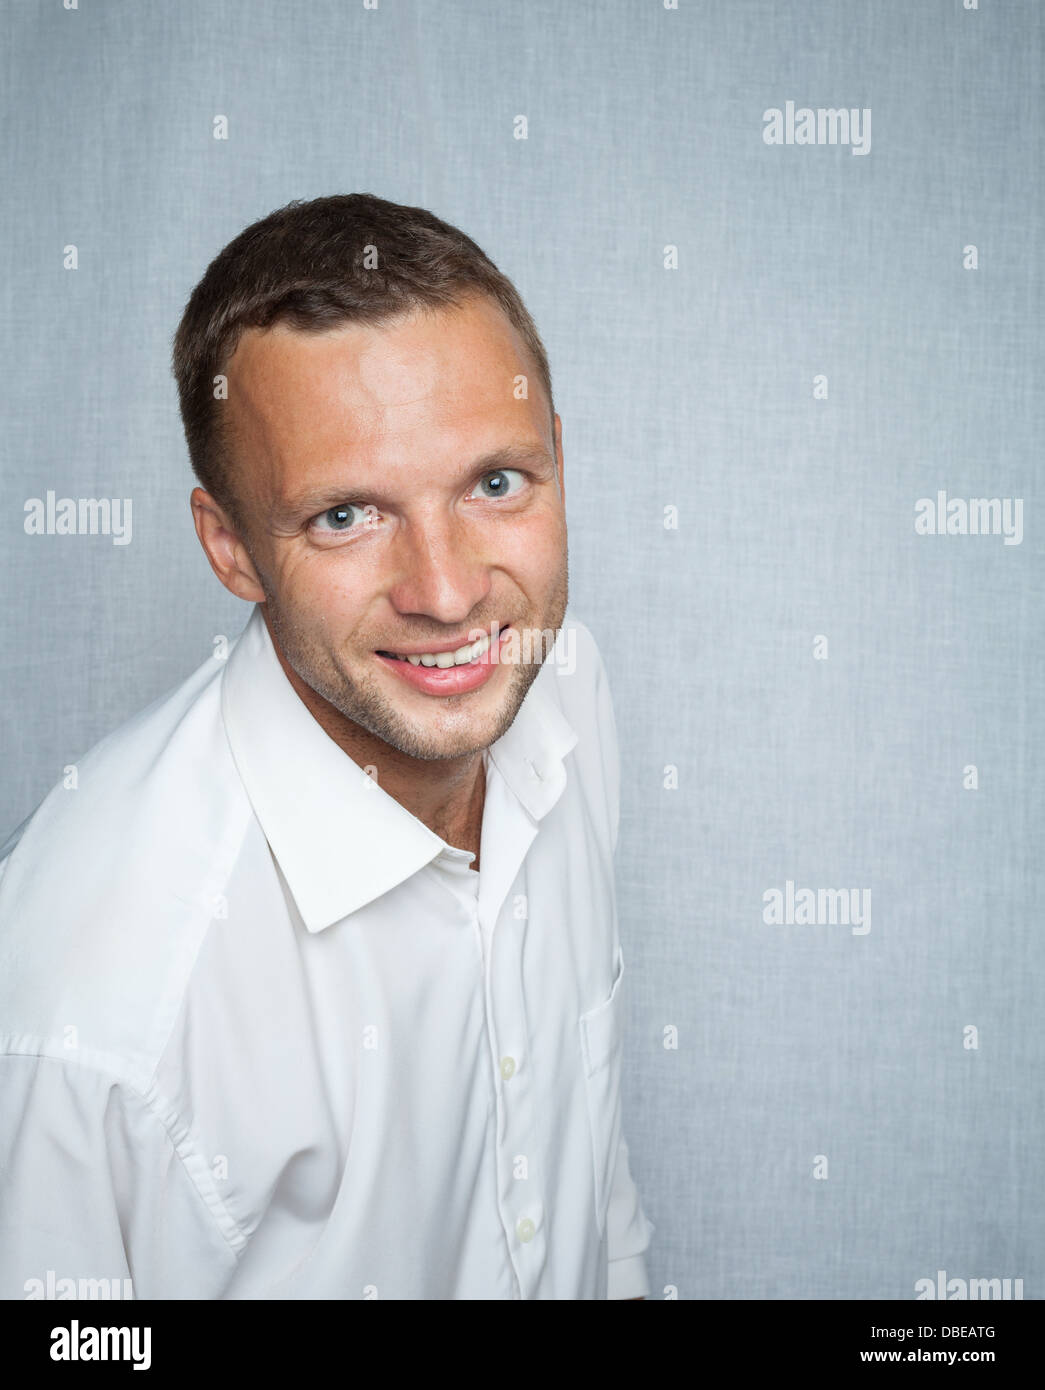 Young smiling man in white shirt over gray background. Studio portrait Stock Photo